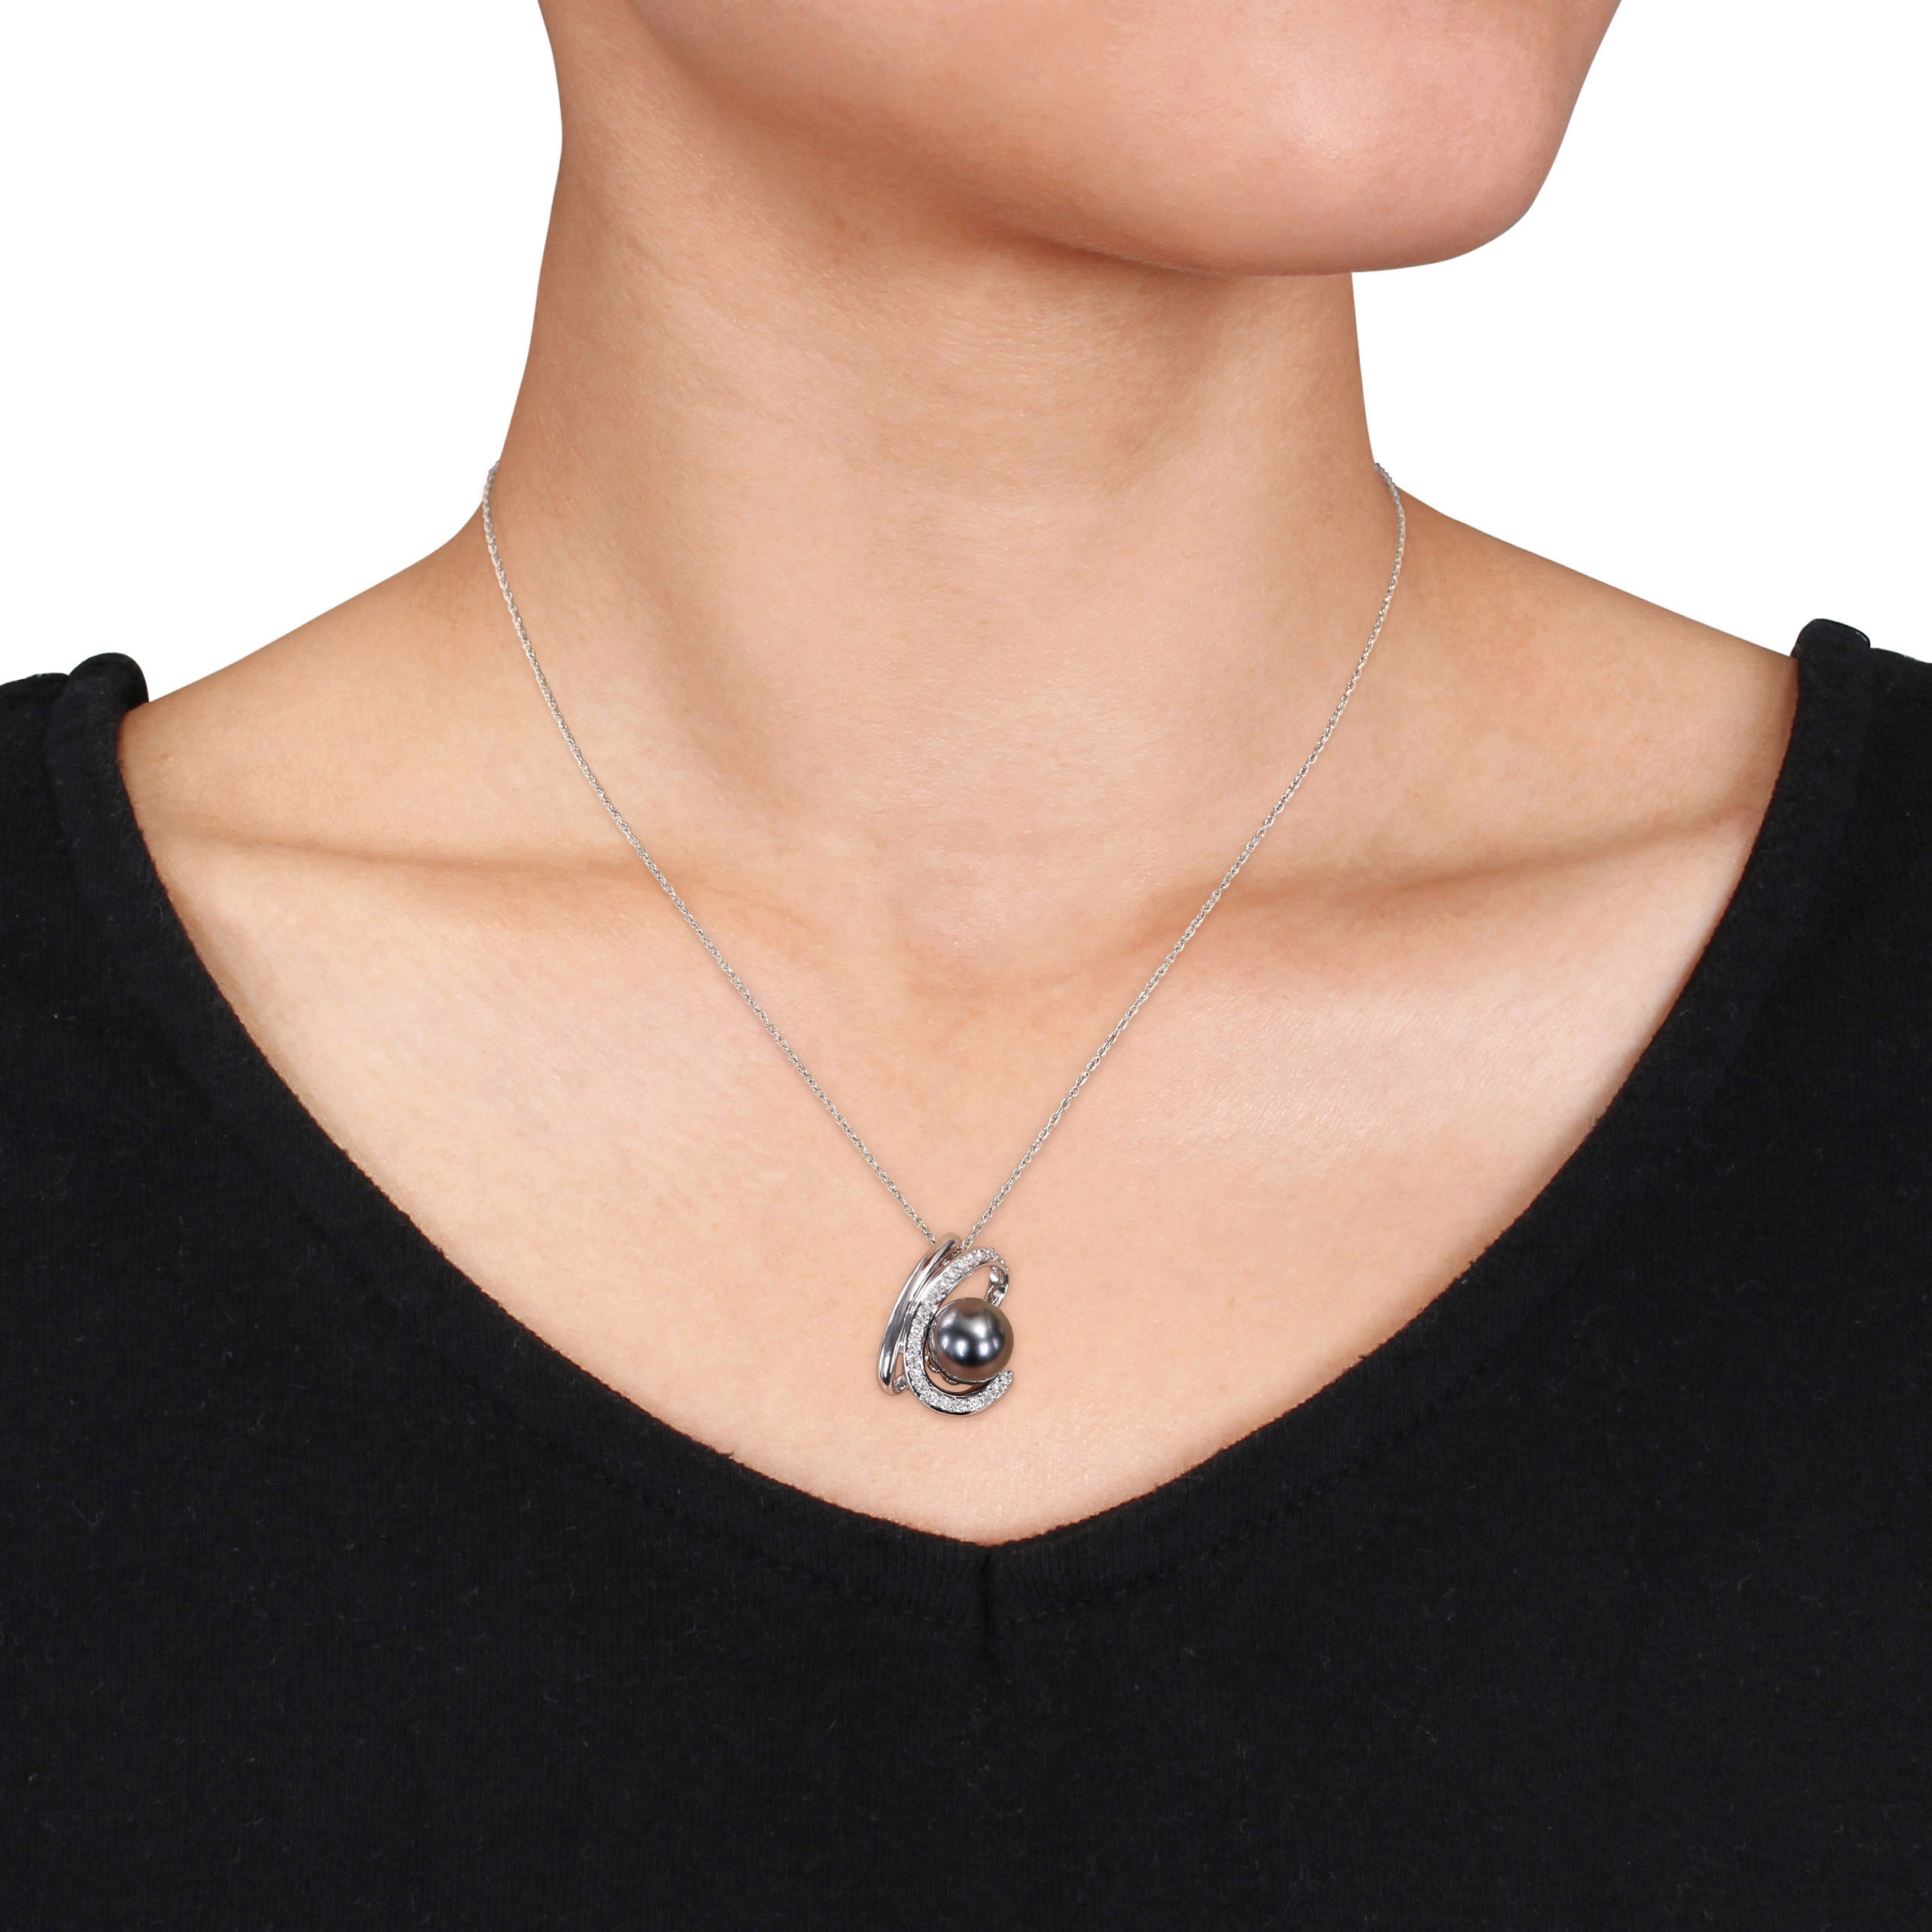 9 - 9.5 MM Black Tahitian Pearl and 1/4 CT TW Diamond Curlicue Pendant with Chain in 10k White Gold